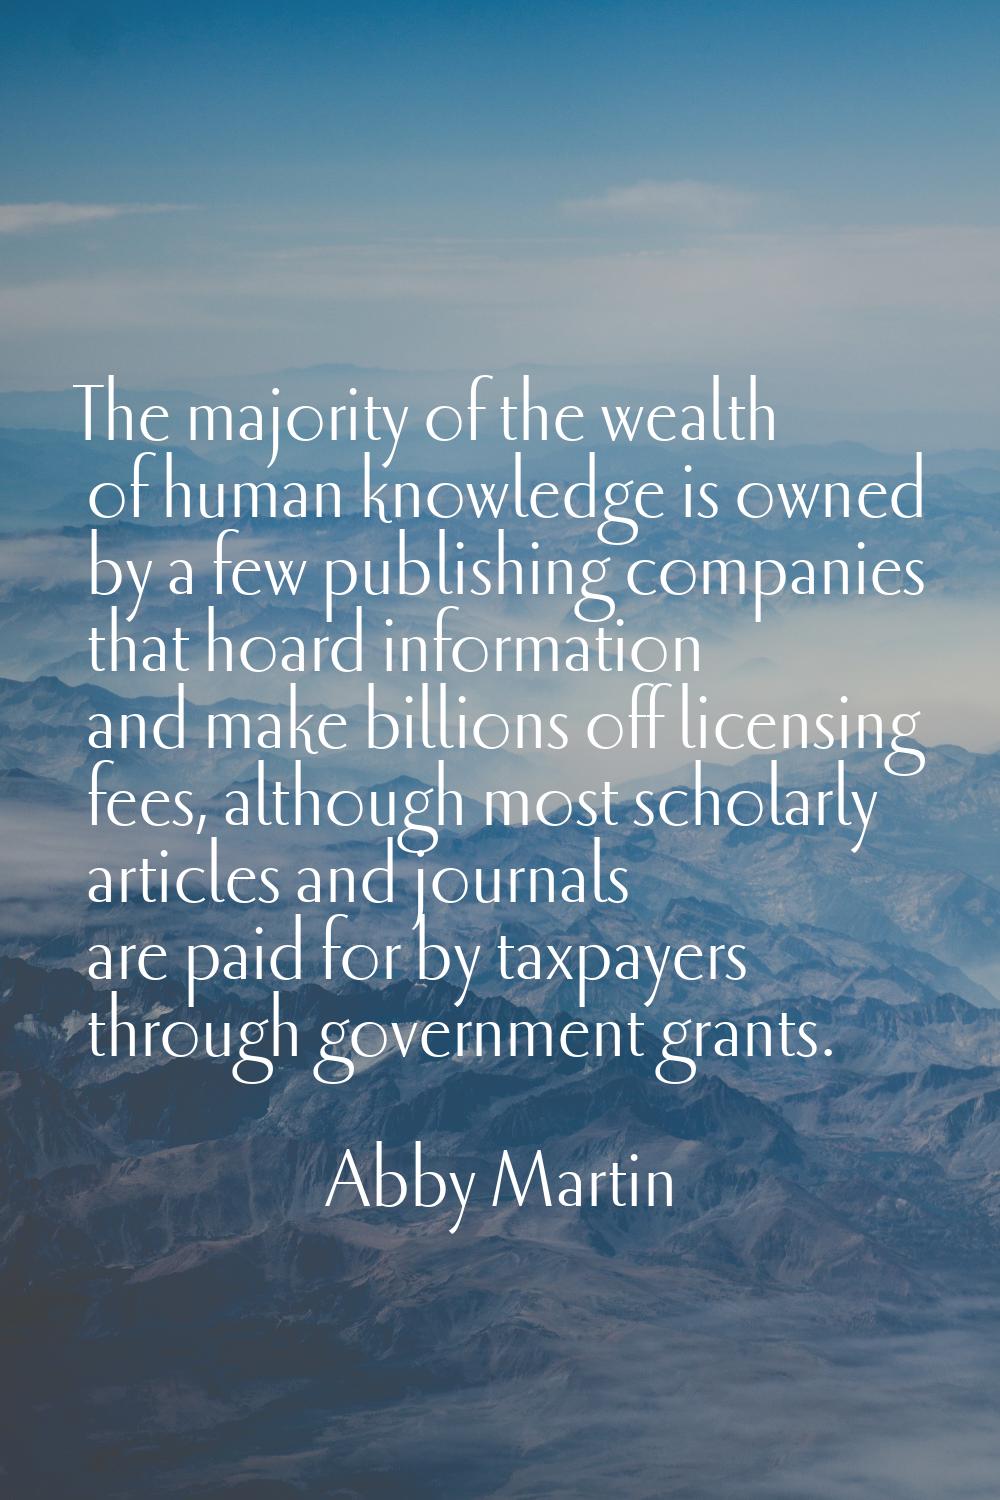 The majority of the wealth of human knowledge is owned by a few publishing companies that hoard inf